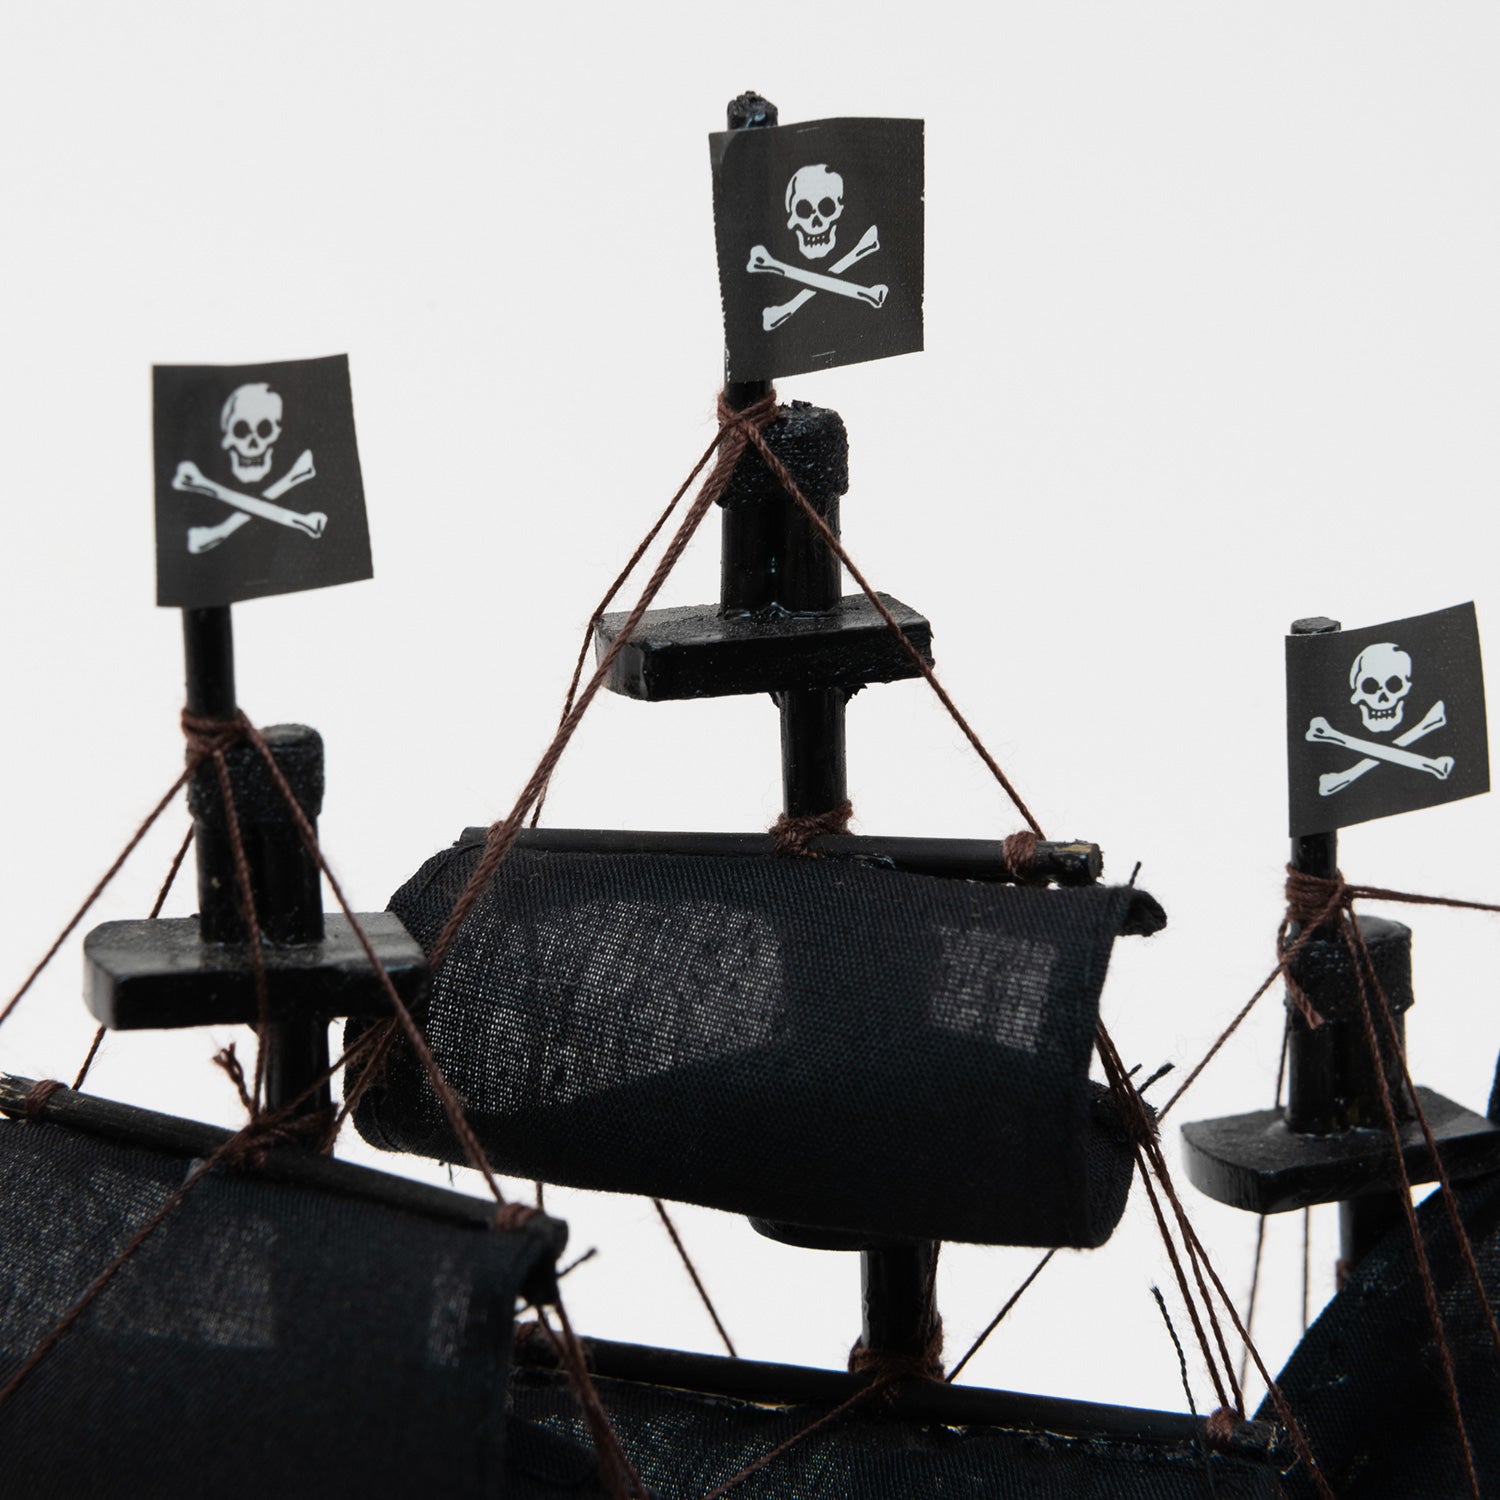 A close-up of three of the jolly roger flags on the pirate model ship.